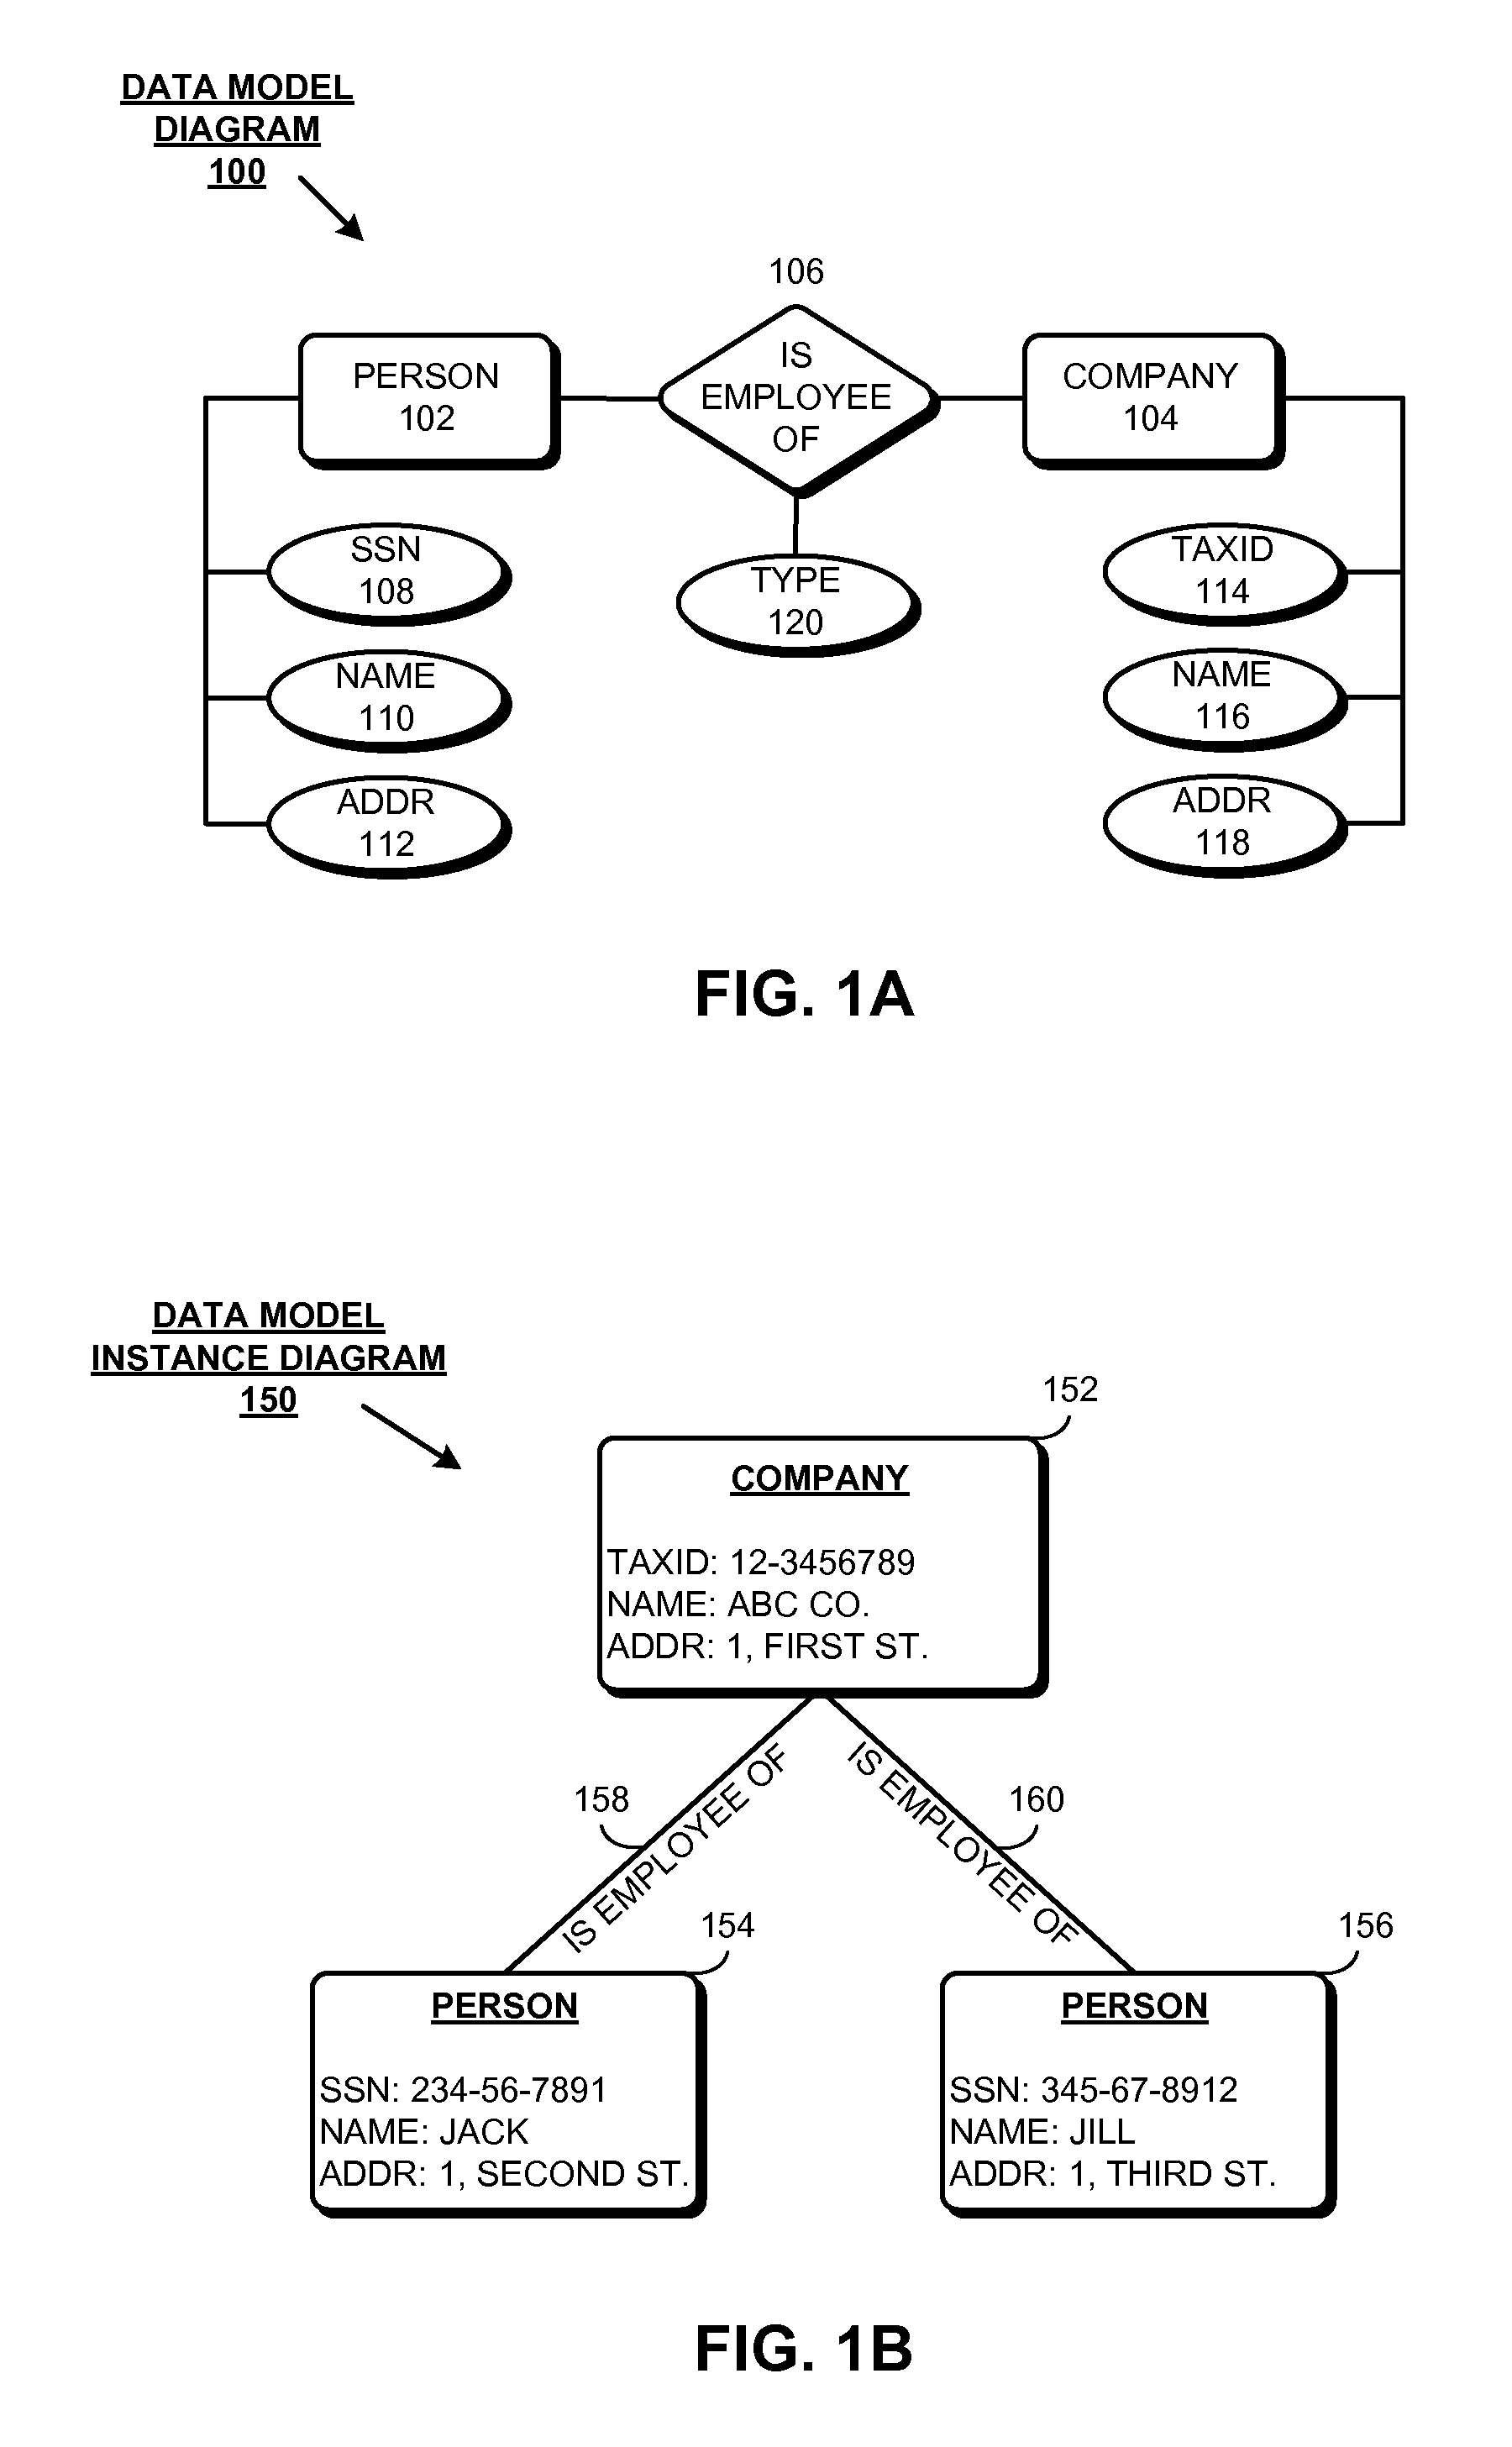 Method and apparatus for displaying data models and data-model instances